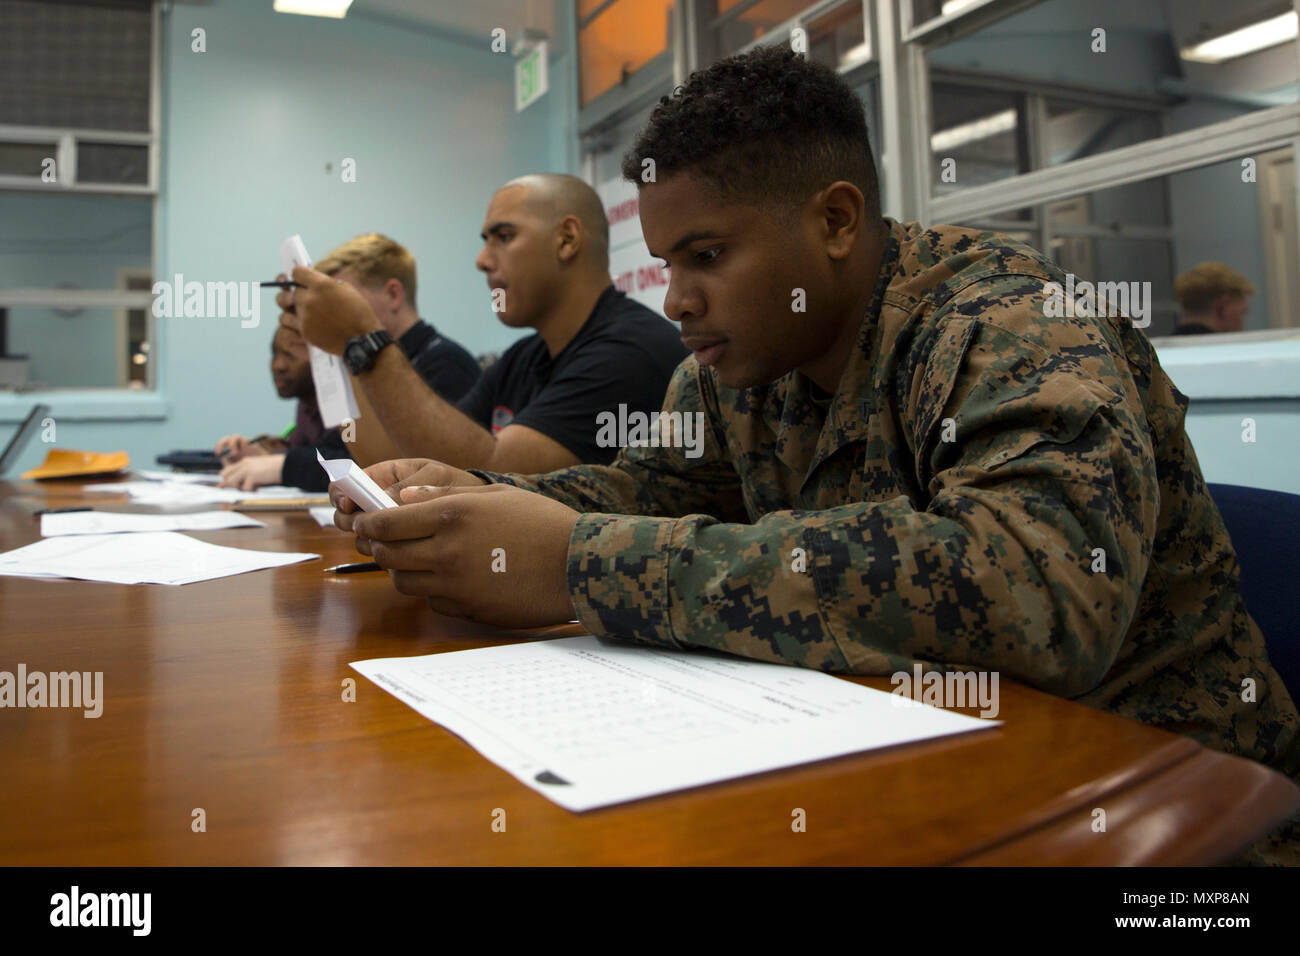 Students study Japanese characters during a Survival Japanese Language Class Nov. 29, 2016 on Marine Corps Air Station Futenma, Okinawa, Japan. The class provided students with the opportunity to learn to speak, read and write basic Japanese words, phrases and characters. The lesson covered the three basic Japanese forms of writing called hiragana, katakana and kanji. (U.S. Marine Corps photo by Cpl. Janessa K. Pon) Stock Photo